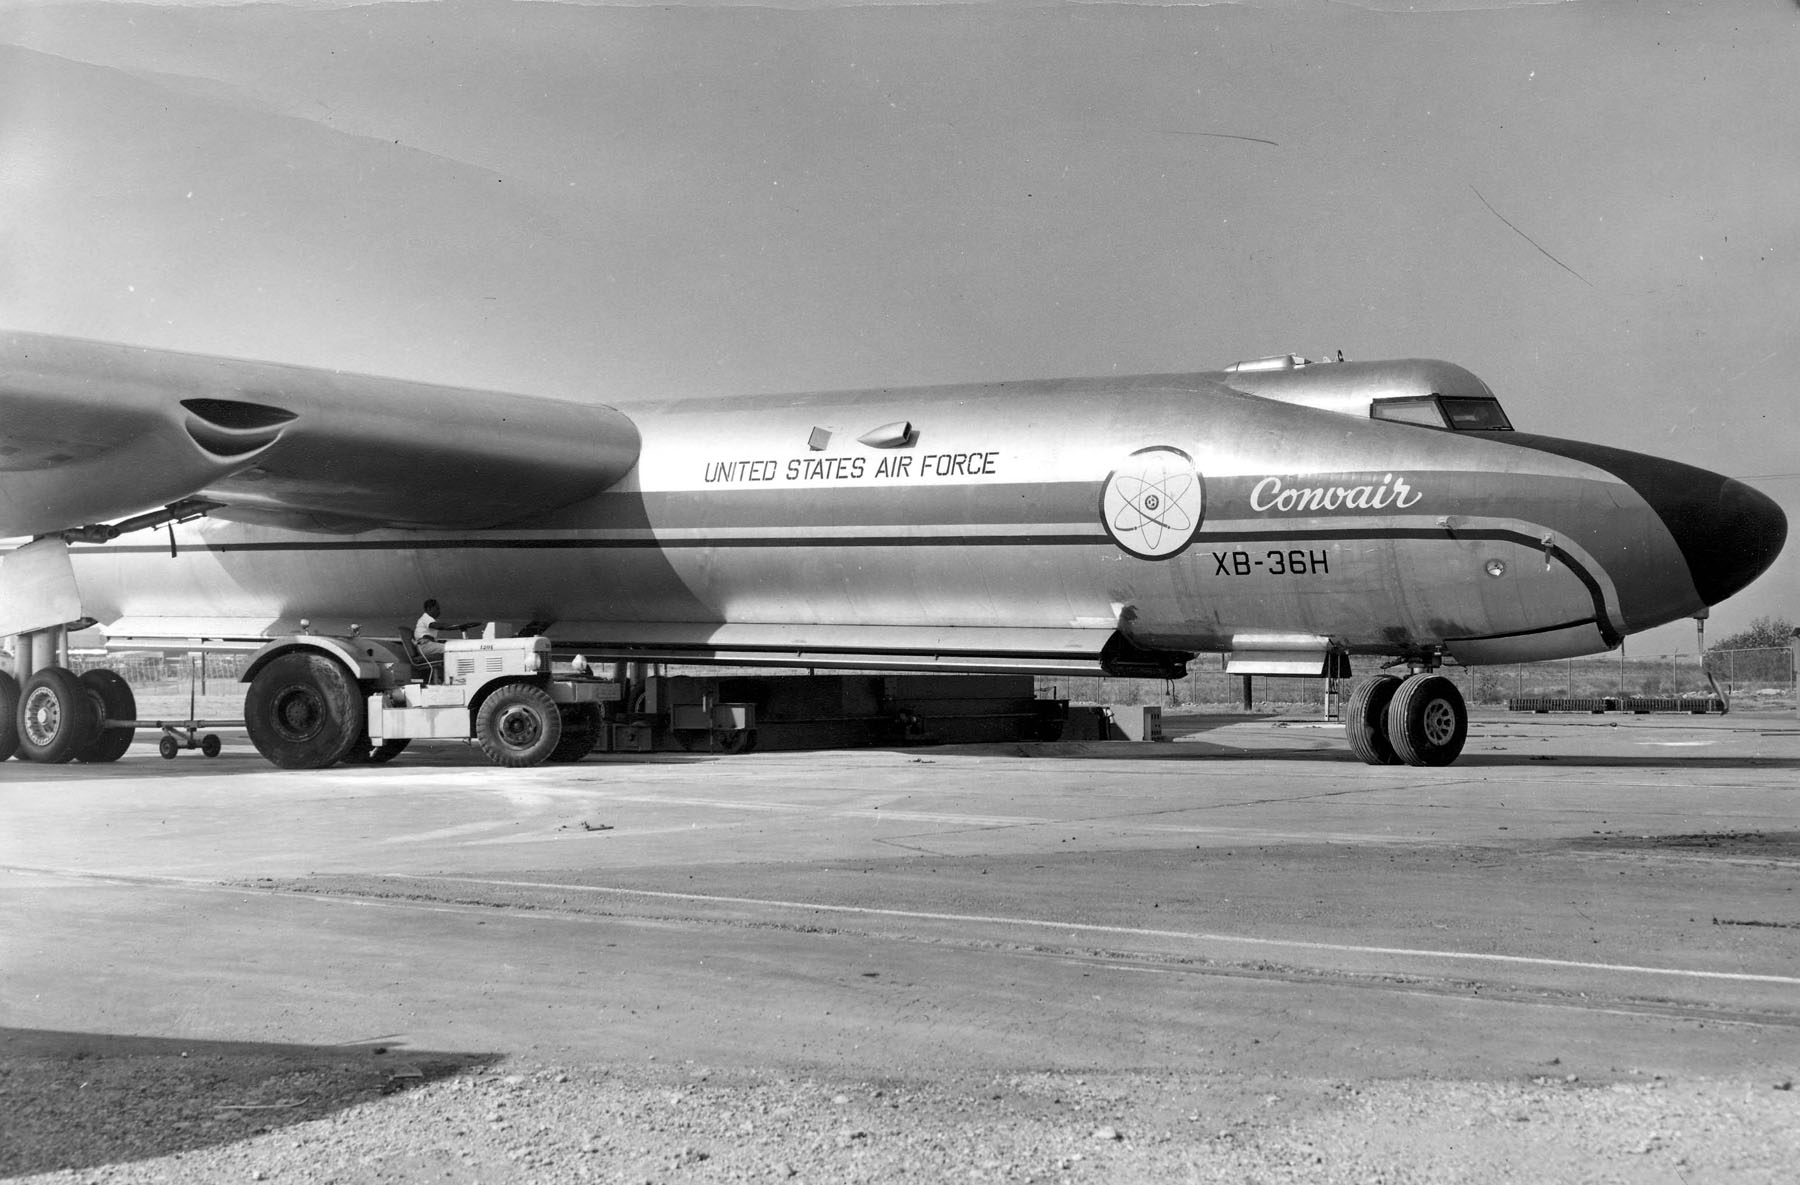 This Week in History: Nuclear-powered aircraft program begins